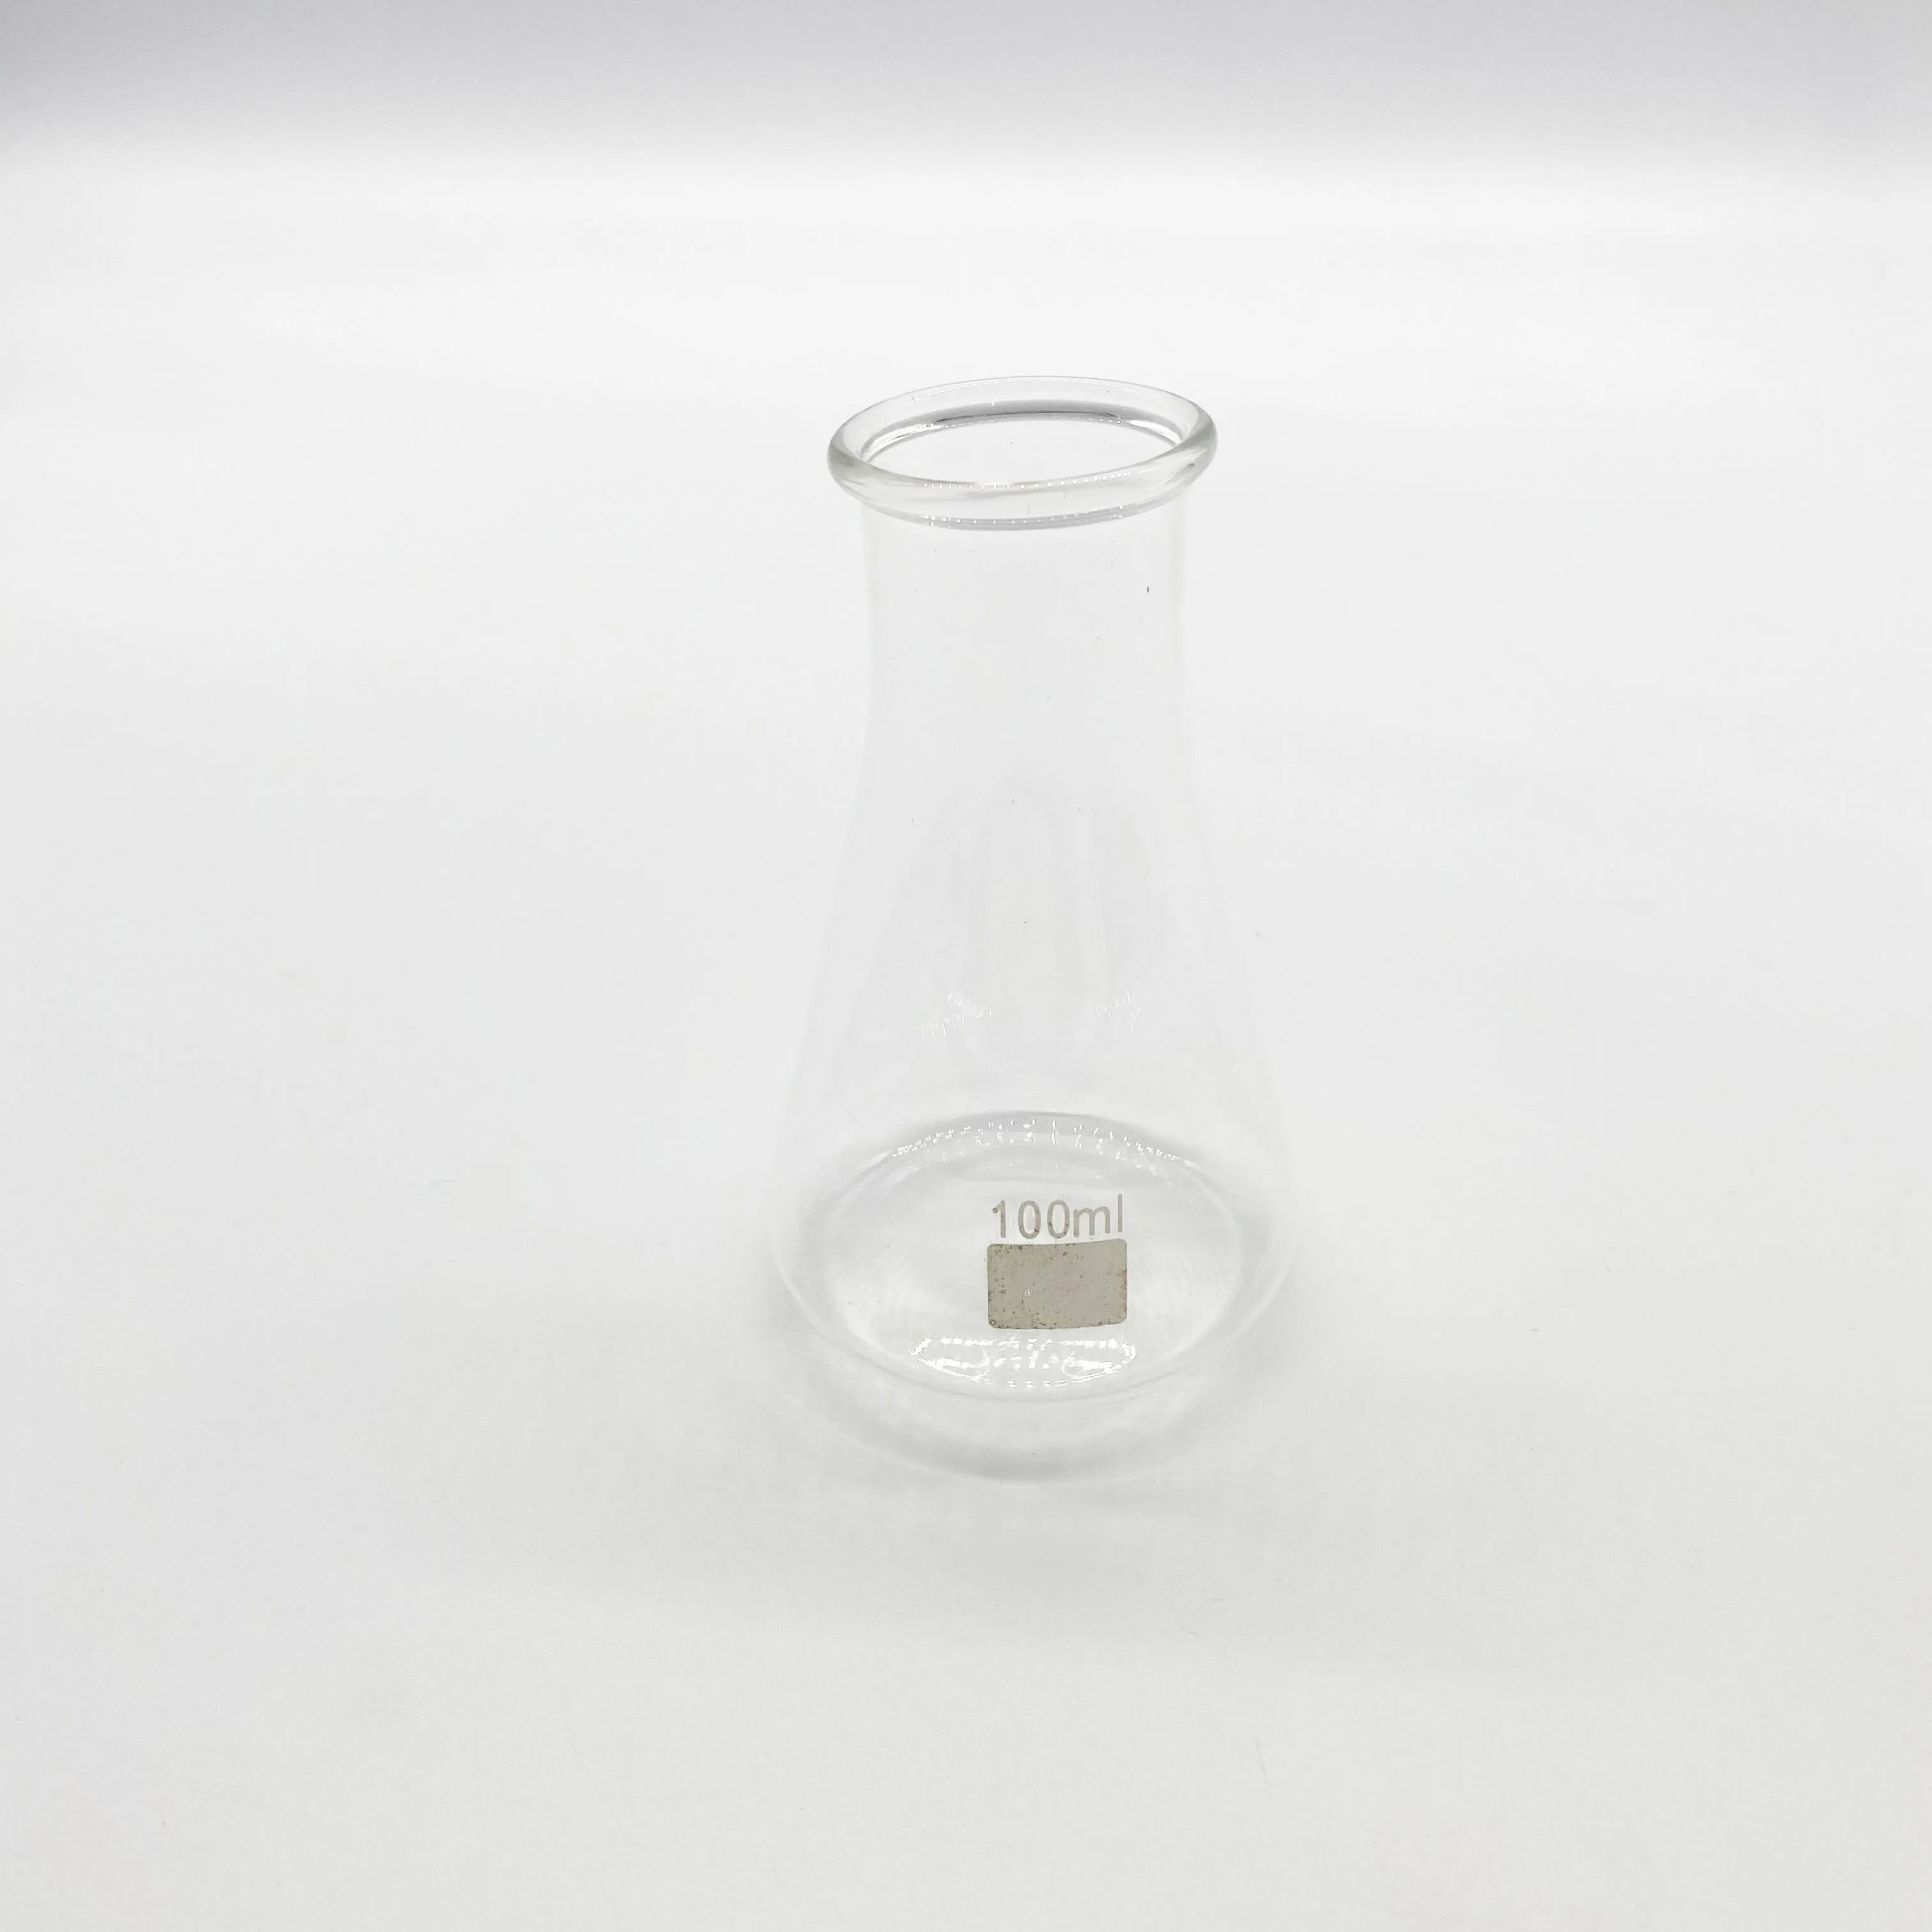 
Guide Medlab Graduated 250ml 1000ml Narrow Wide Mouth Glass Erlenmeyer Conical Flask 